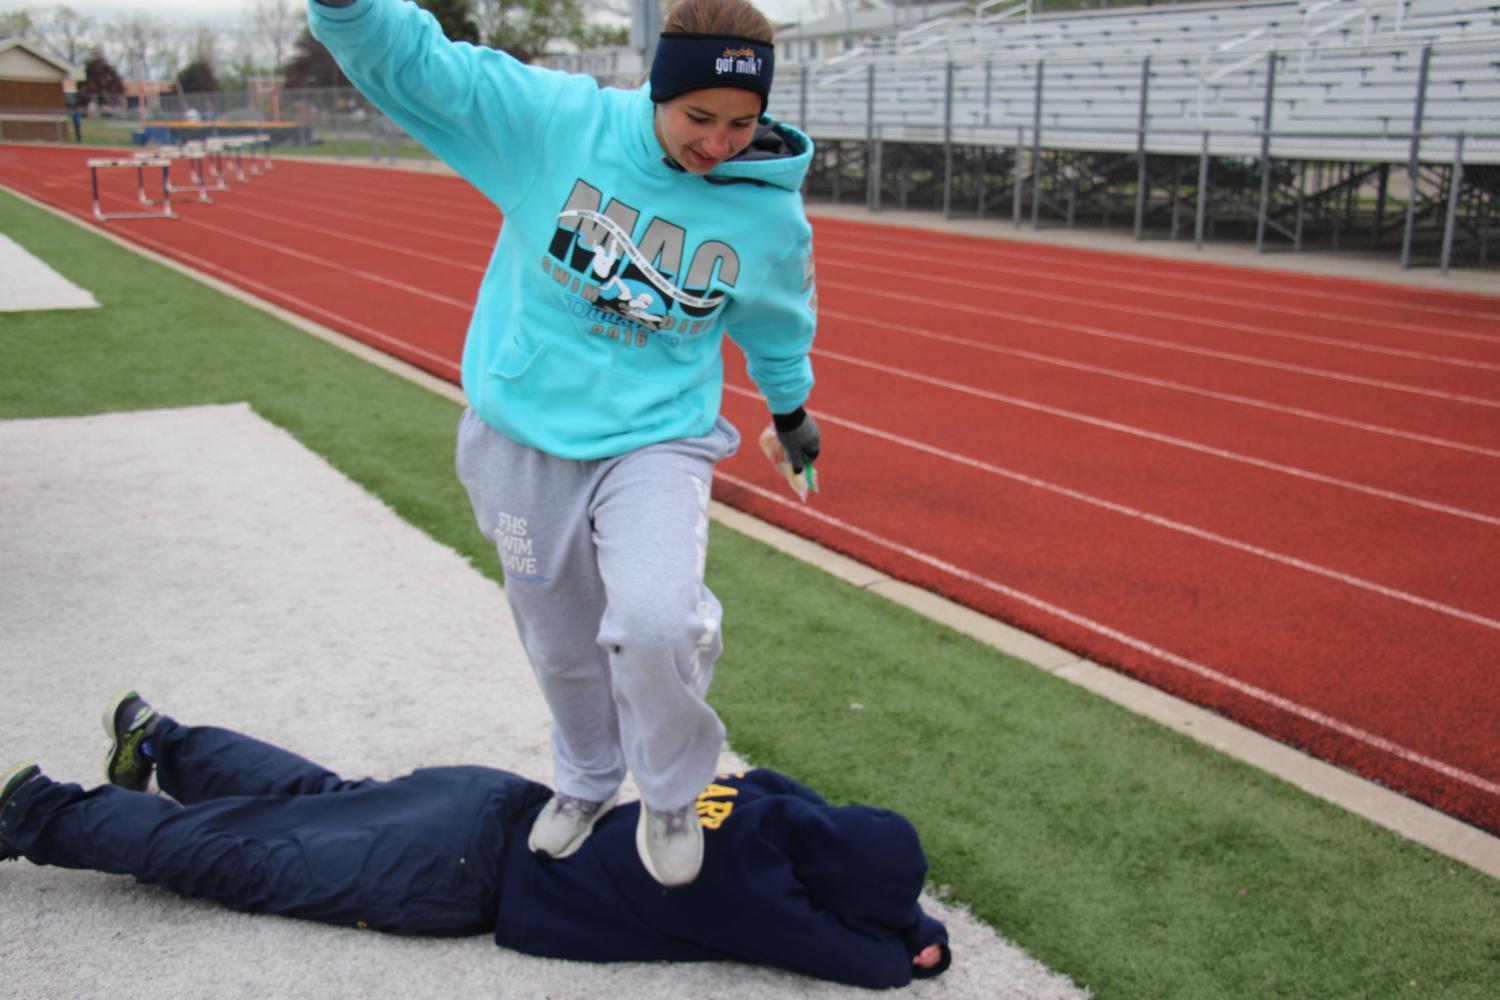 After their races, Senior Janice Chandler decides to have some fun while waiting for the next race to start by giving Ben Clark a walking back massage. 